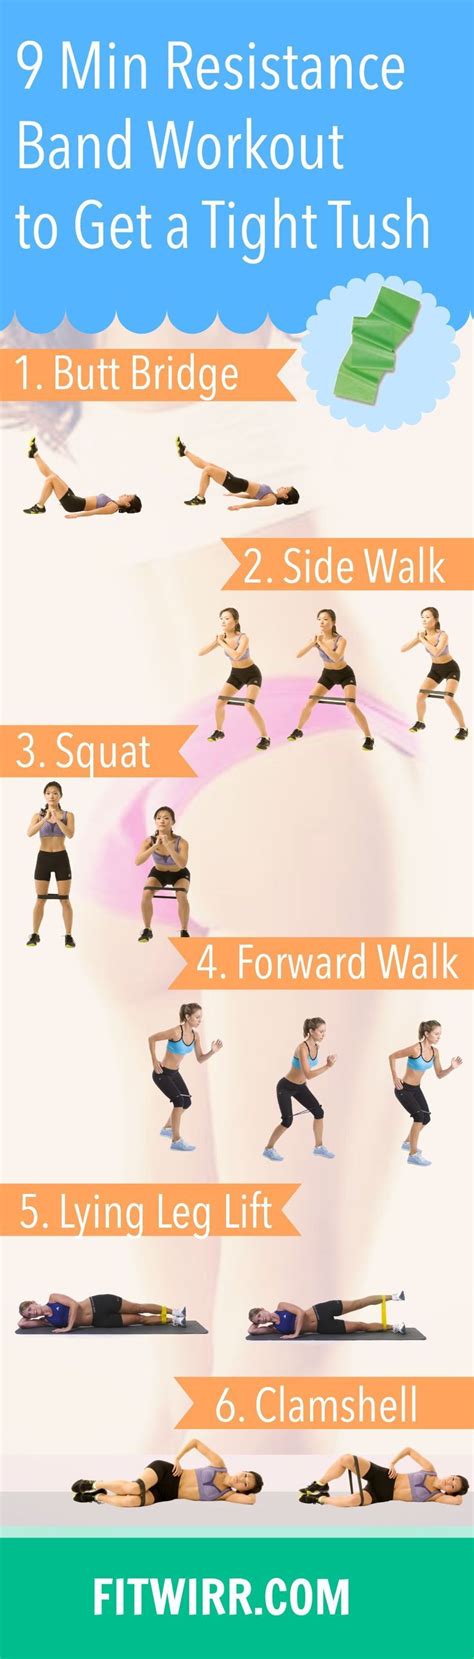 Resistance Band Exercises For A Full Body Workout Fitwirr Bikini